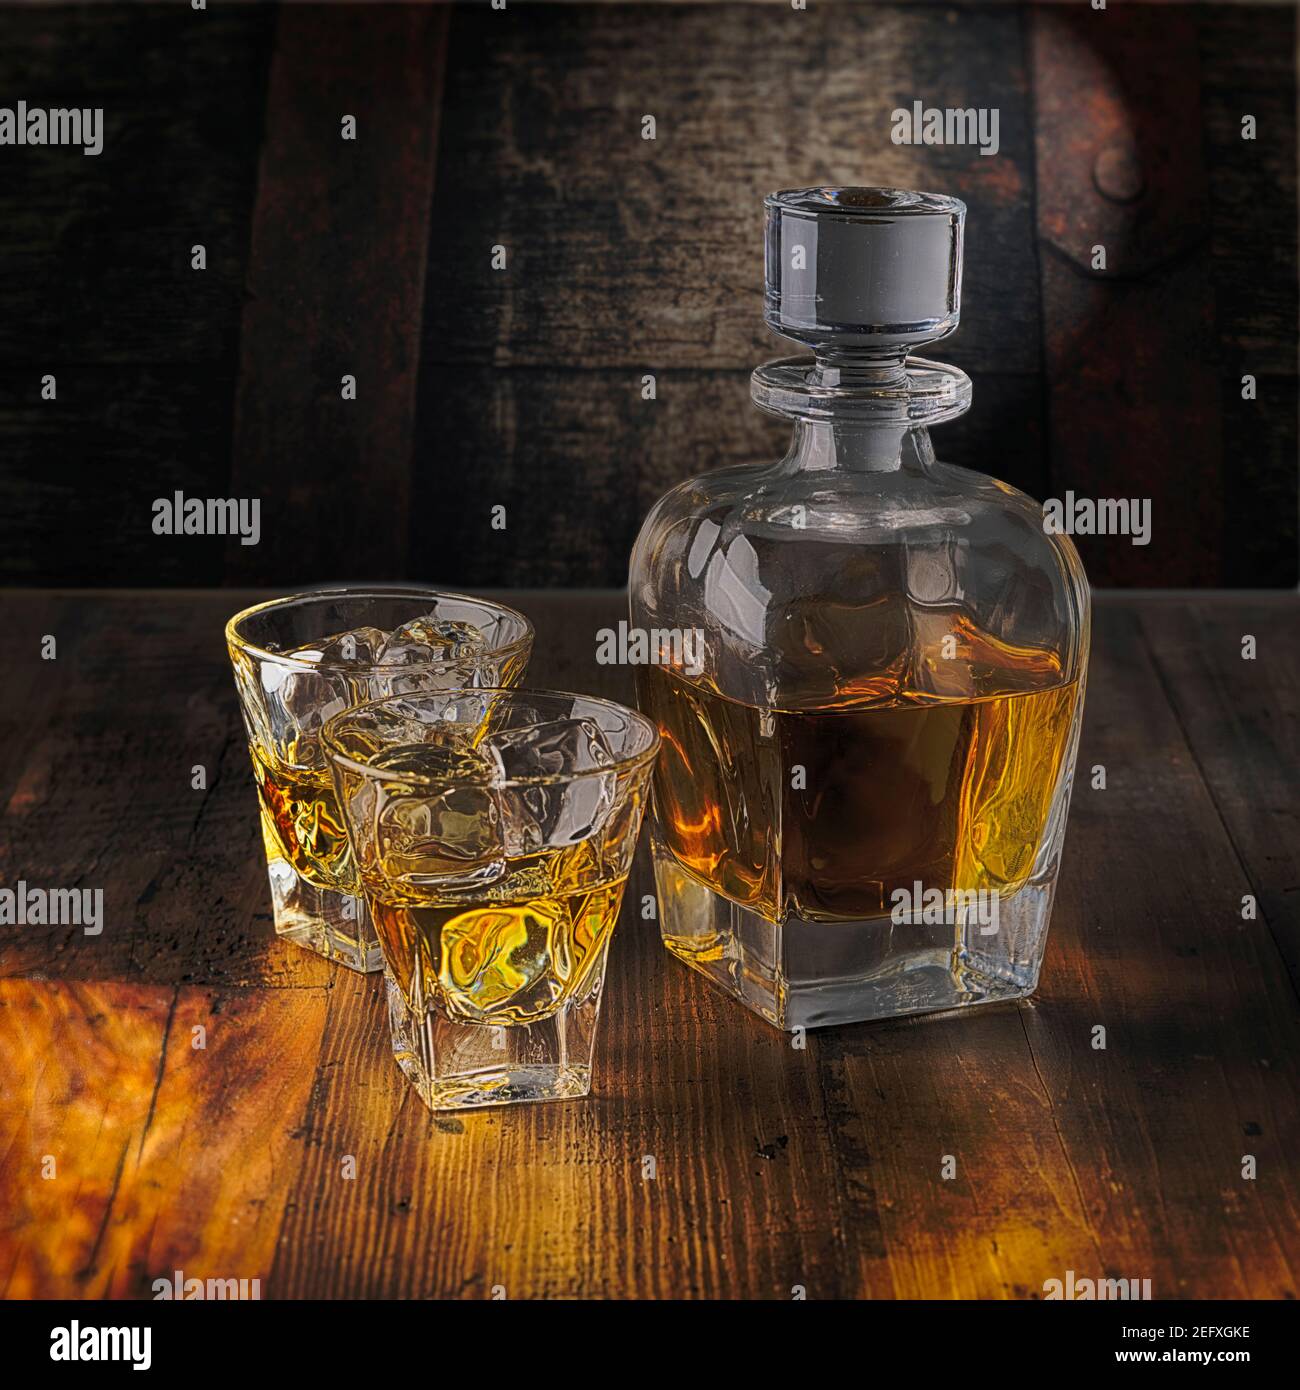 A Whiskey Bottle and Two Glasses on the Rocks on a Wooden Table Stock Photo